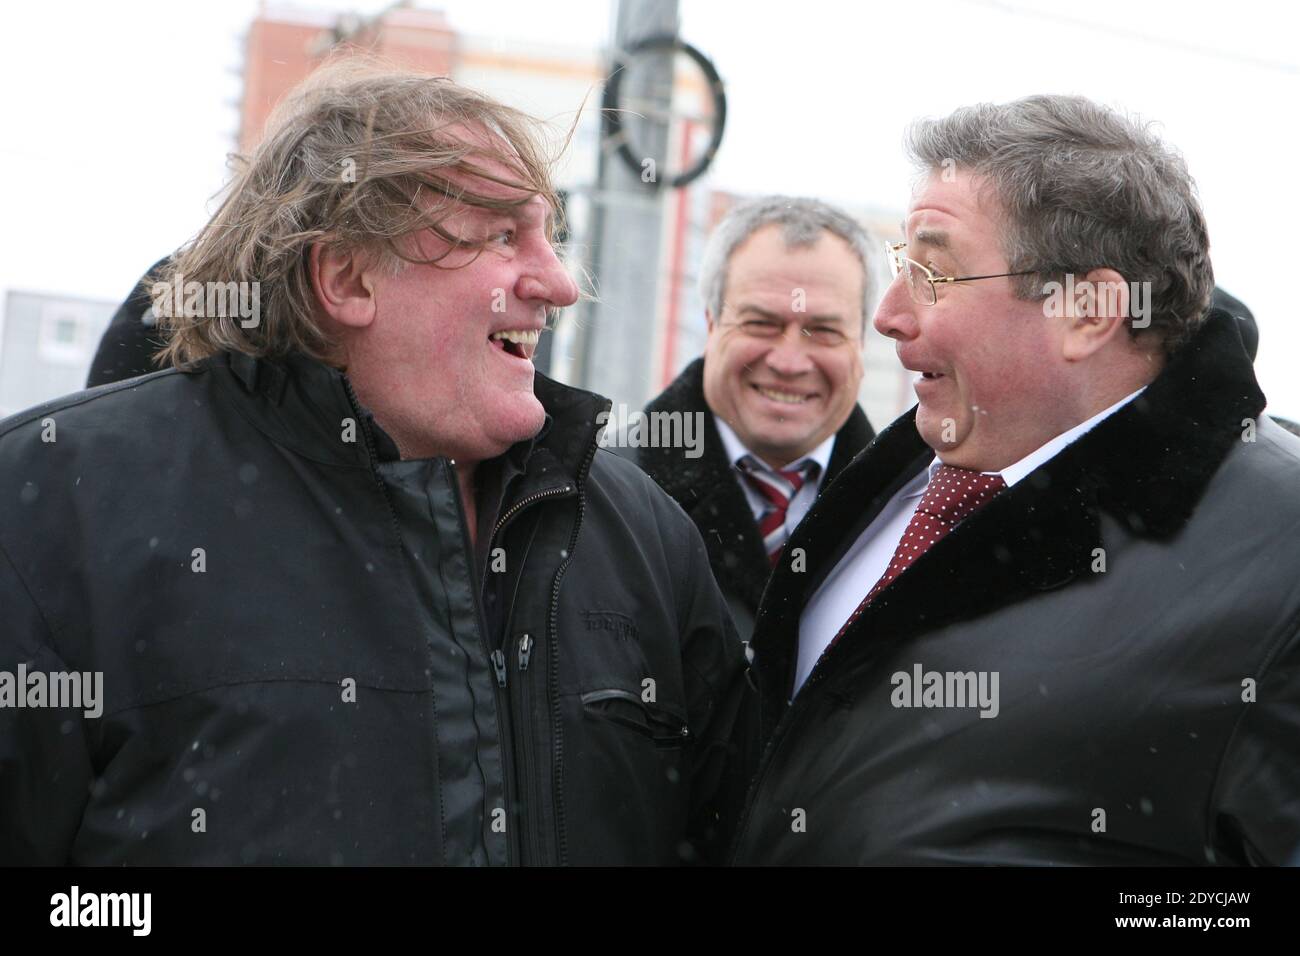 French actor Gerard Depardieu (L) who was granted Russian citizenship is accompanied by Head of the Republic of Mordovia Vladimir Volkov while visiting Yemelyan Pugachev's fort in Saransk, Mordovia, Russia, January 6, 2013. Photo Marine Dumeurger/ABACAPRESS.COM Stock Photo